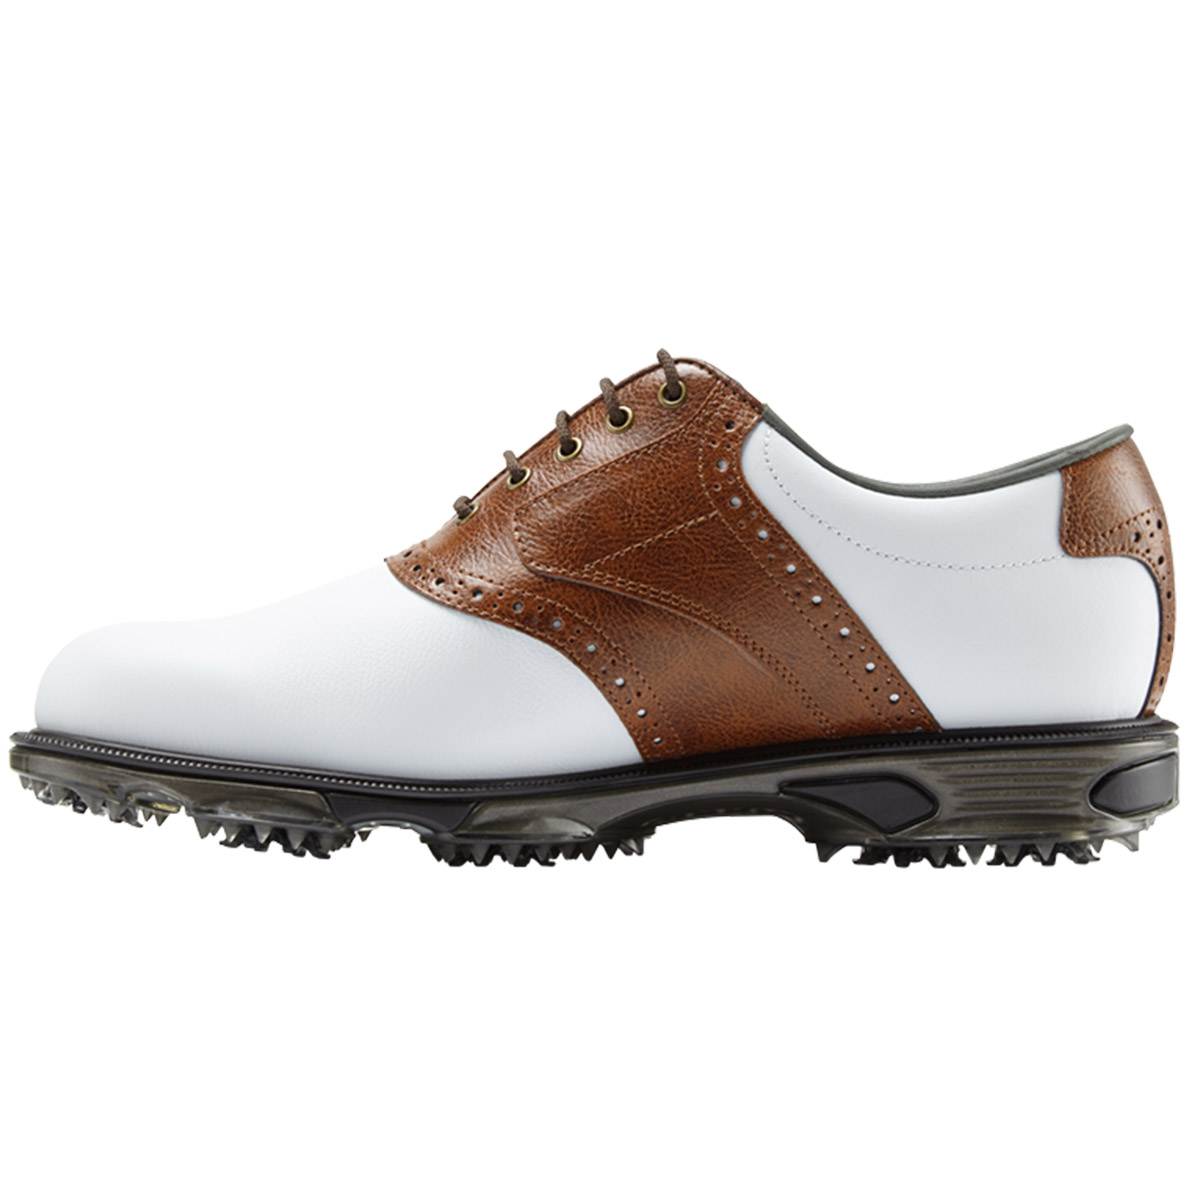 FootJoy DryJoys Tour Shoes from american golf